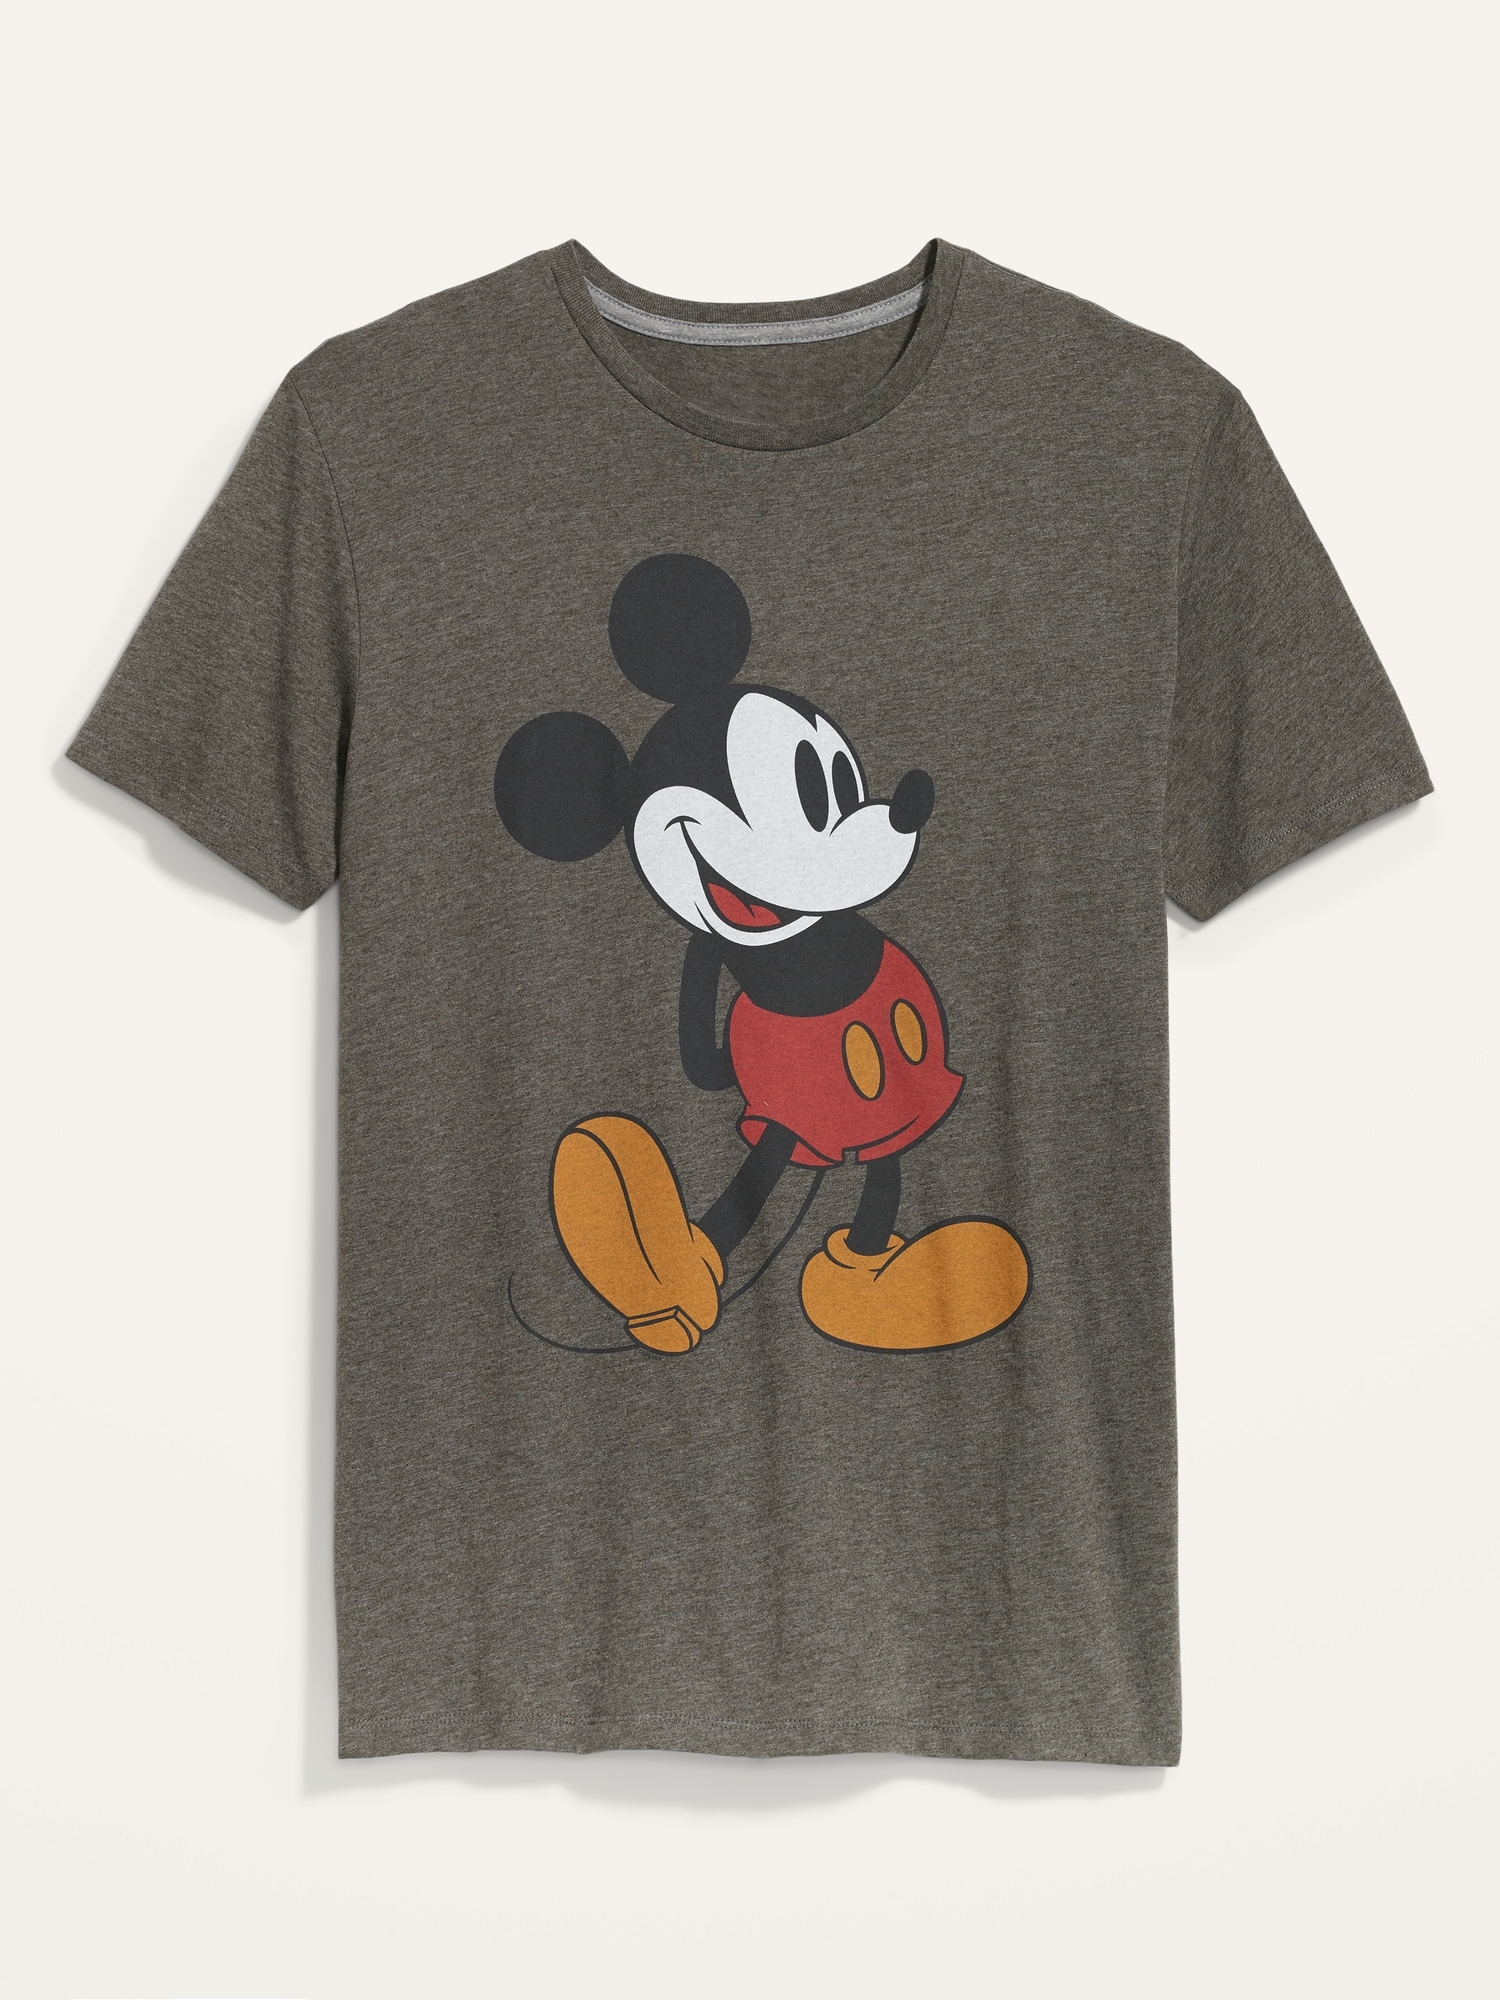 Old Navy Disney© Mickey Mouse Gender-Neutral T-Shirt for Adults gray. 1